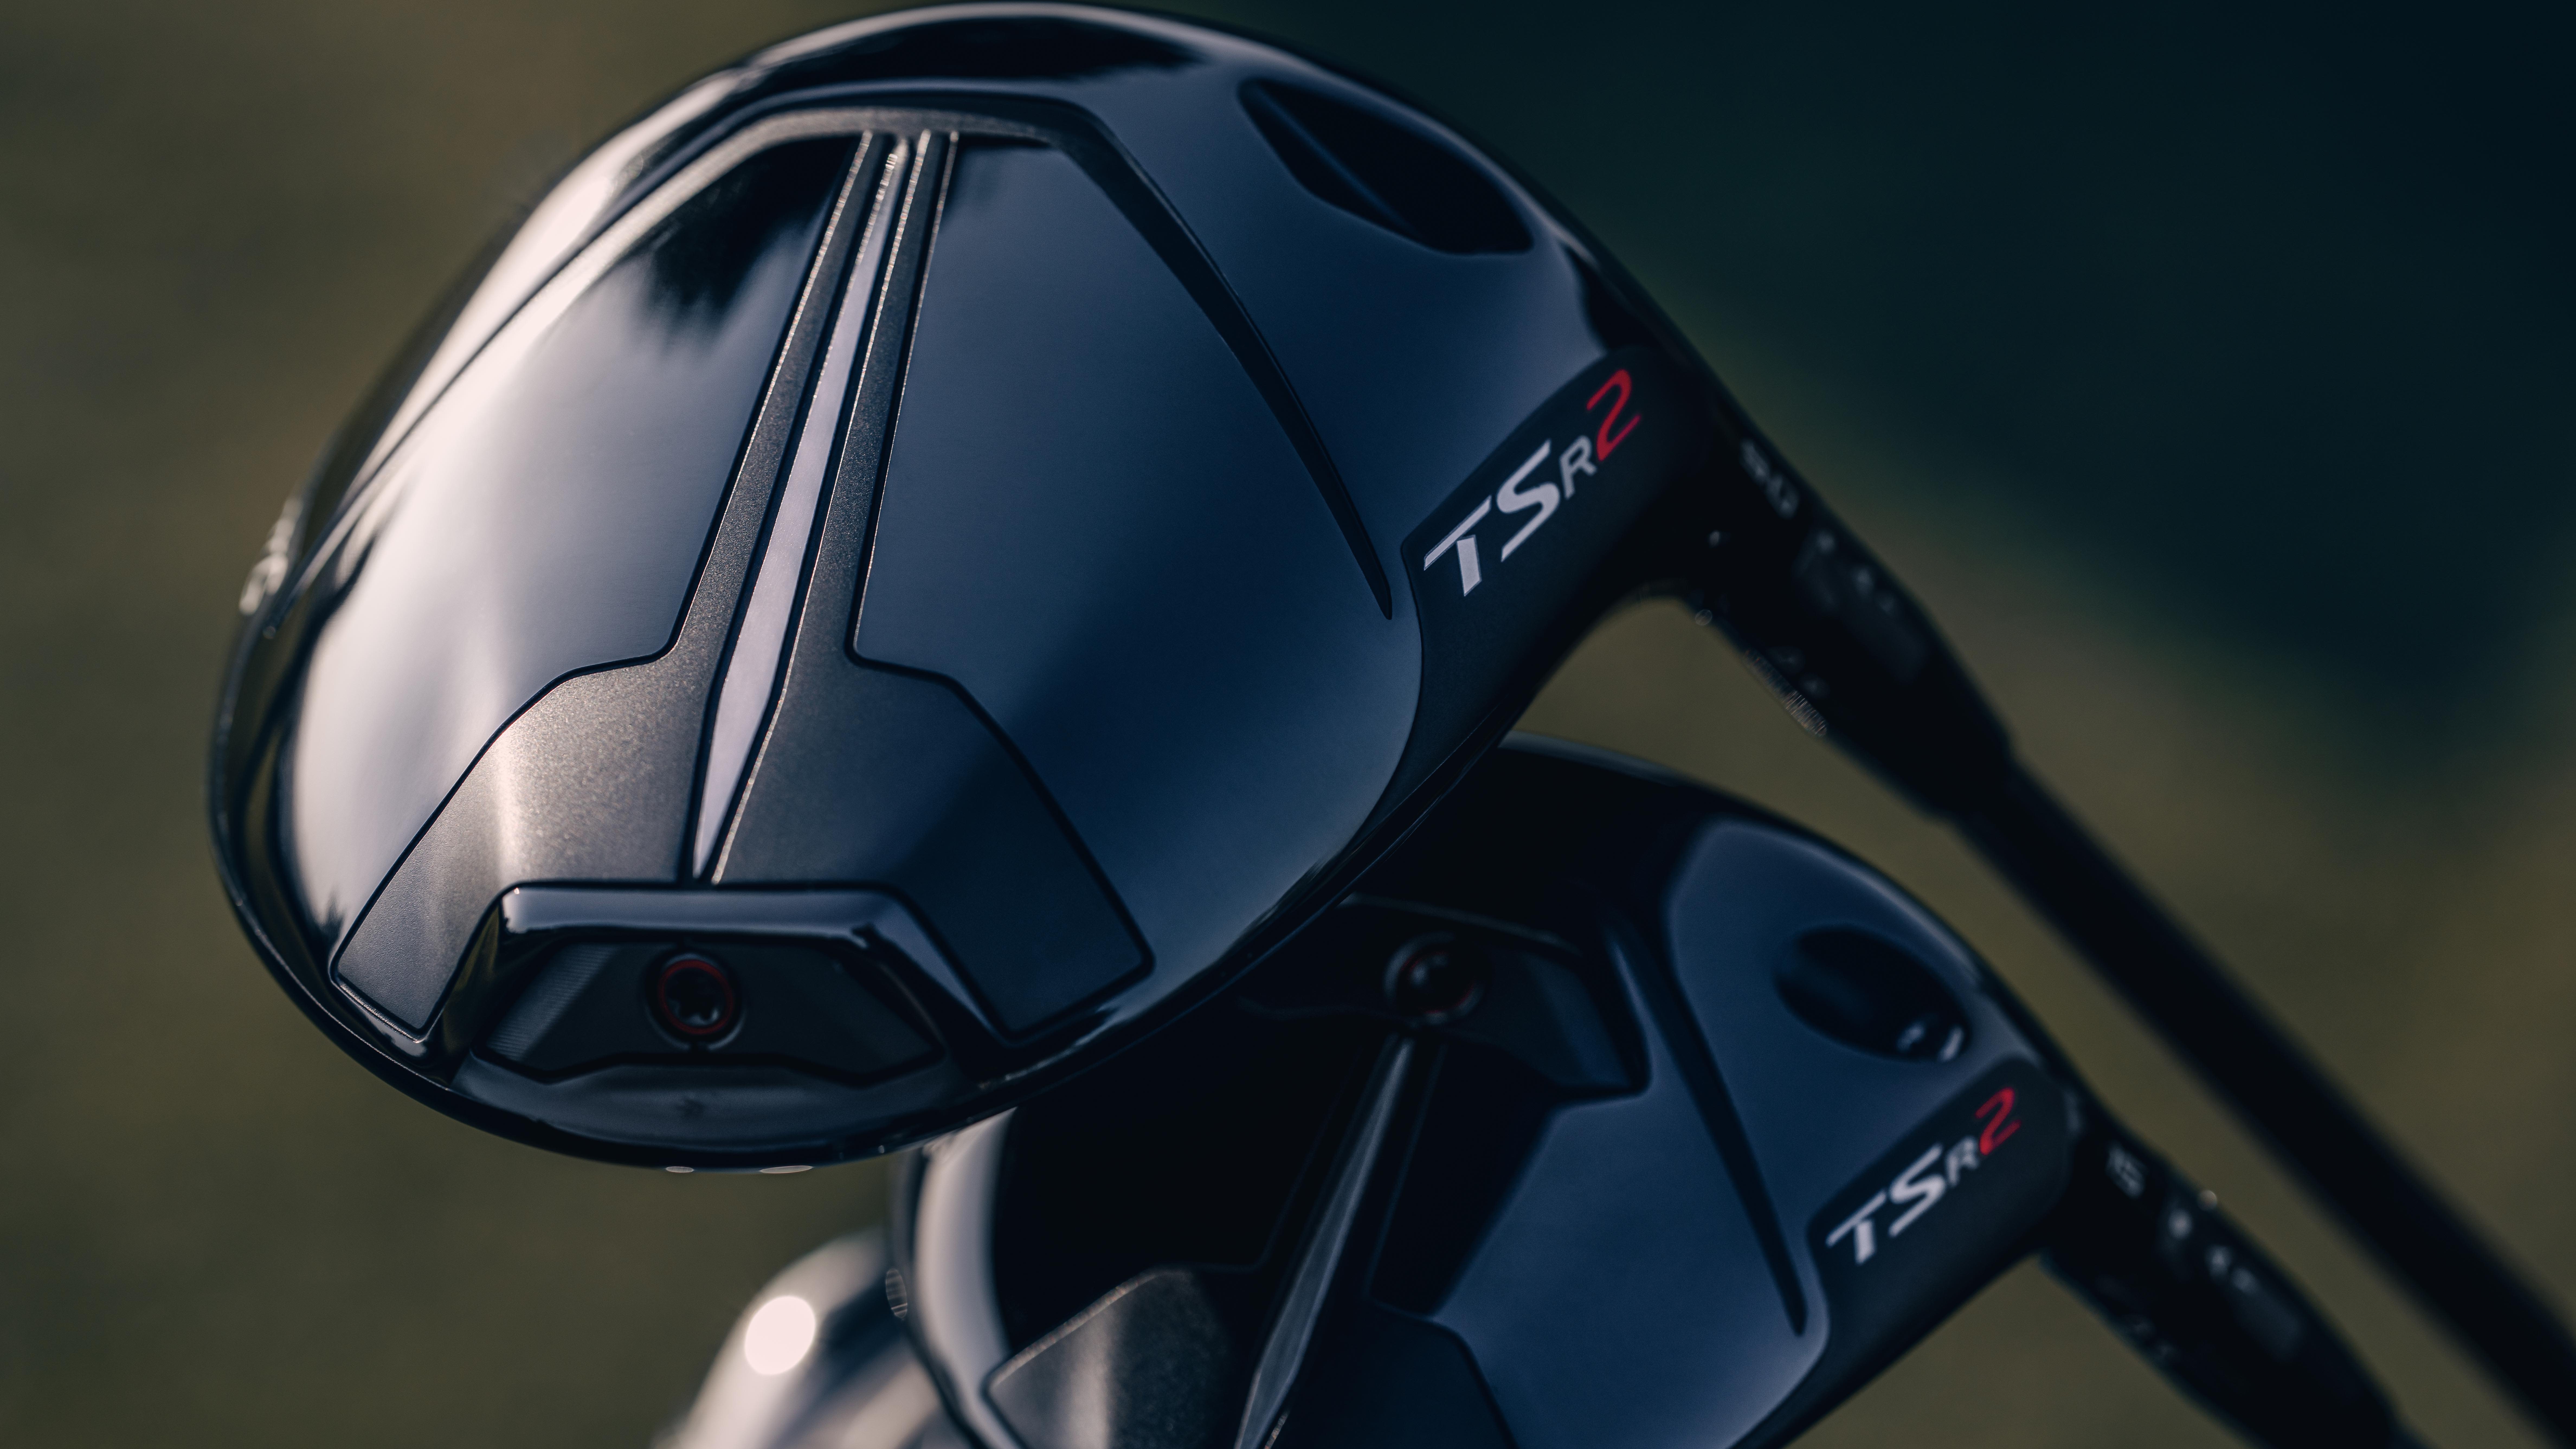 The TSR2 driver from Titleist (photo courtesy of Titleist).